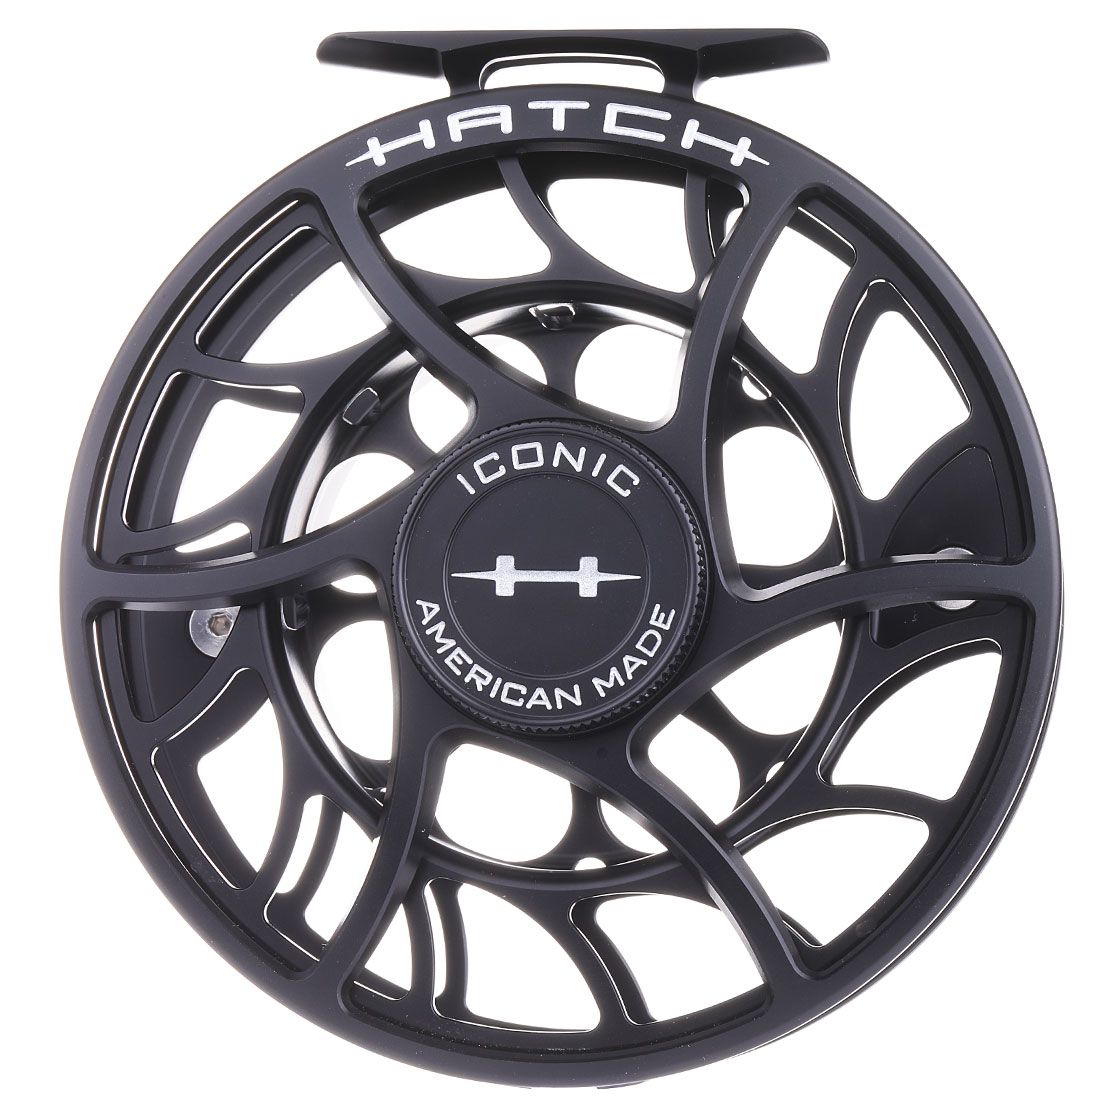 Hatch Iconic Fly Reel Large Arbor black/silver, Reels